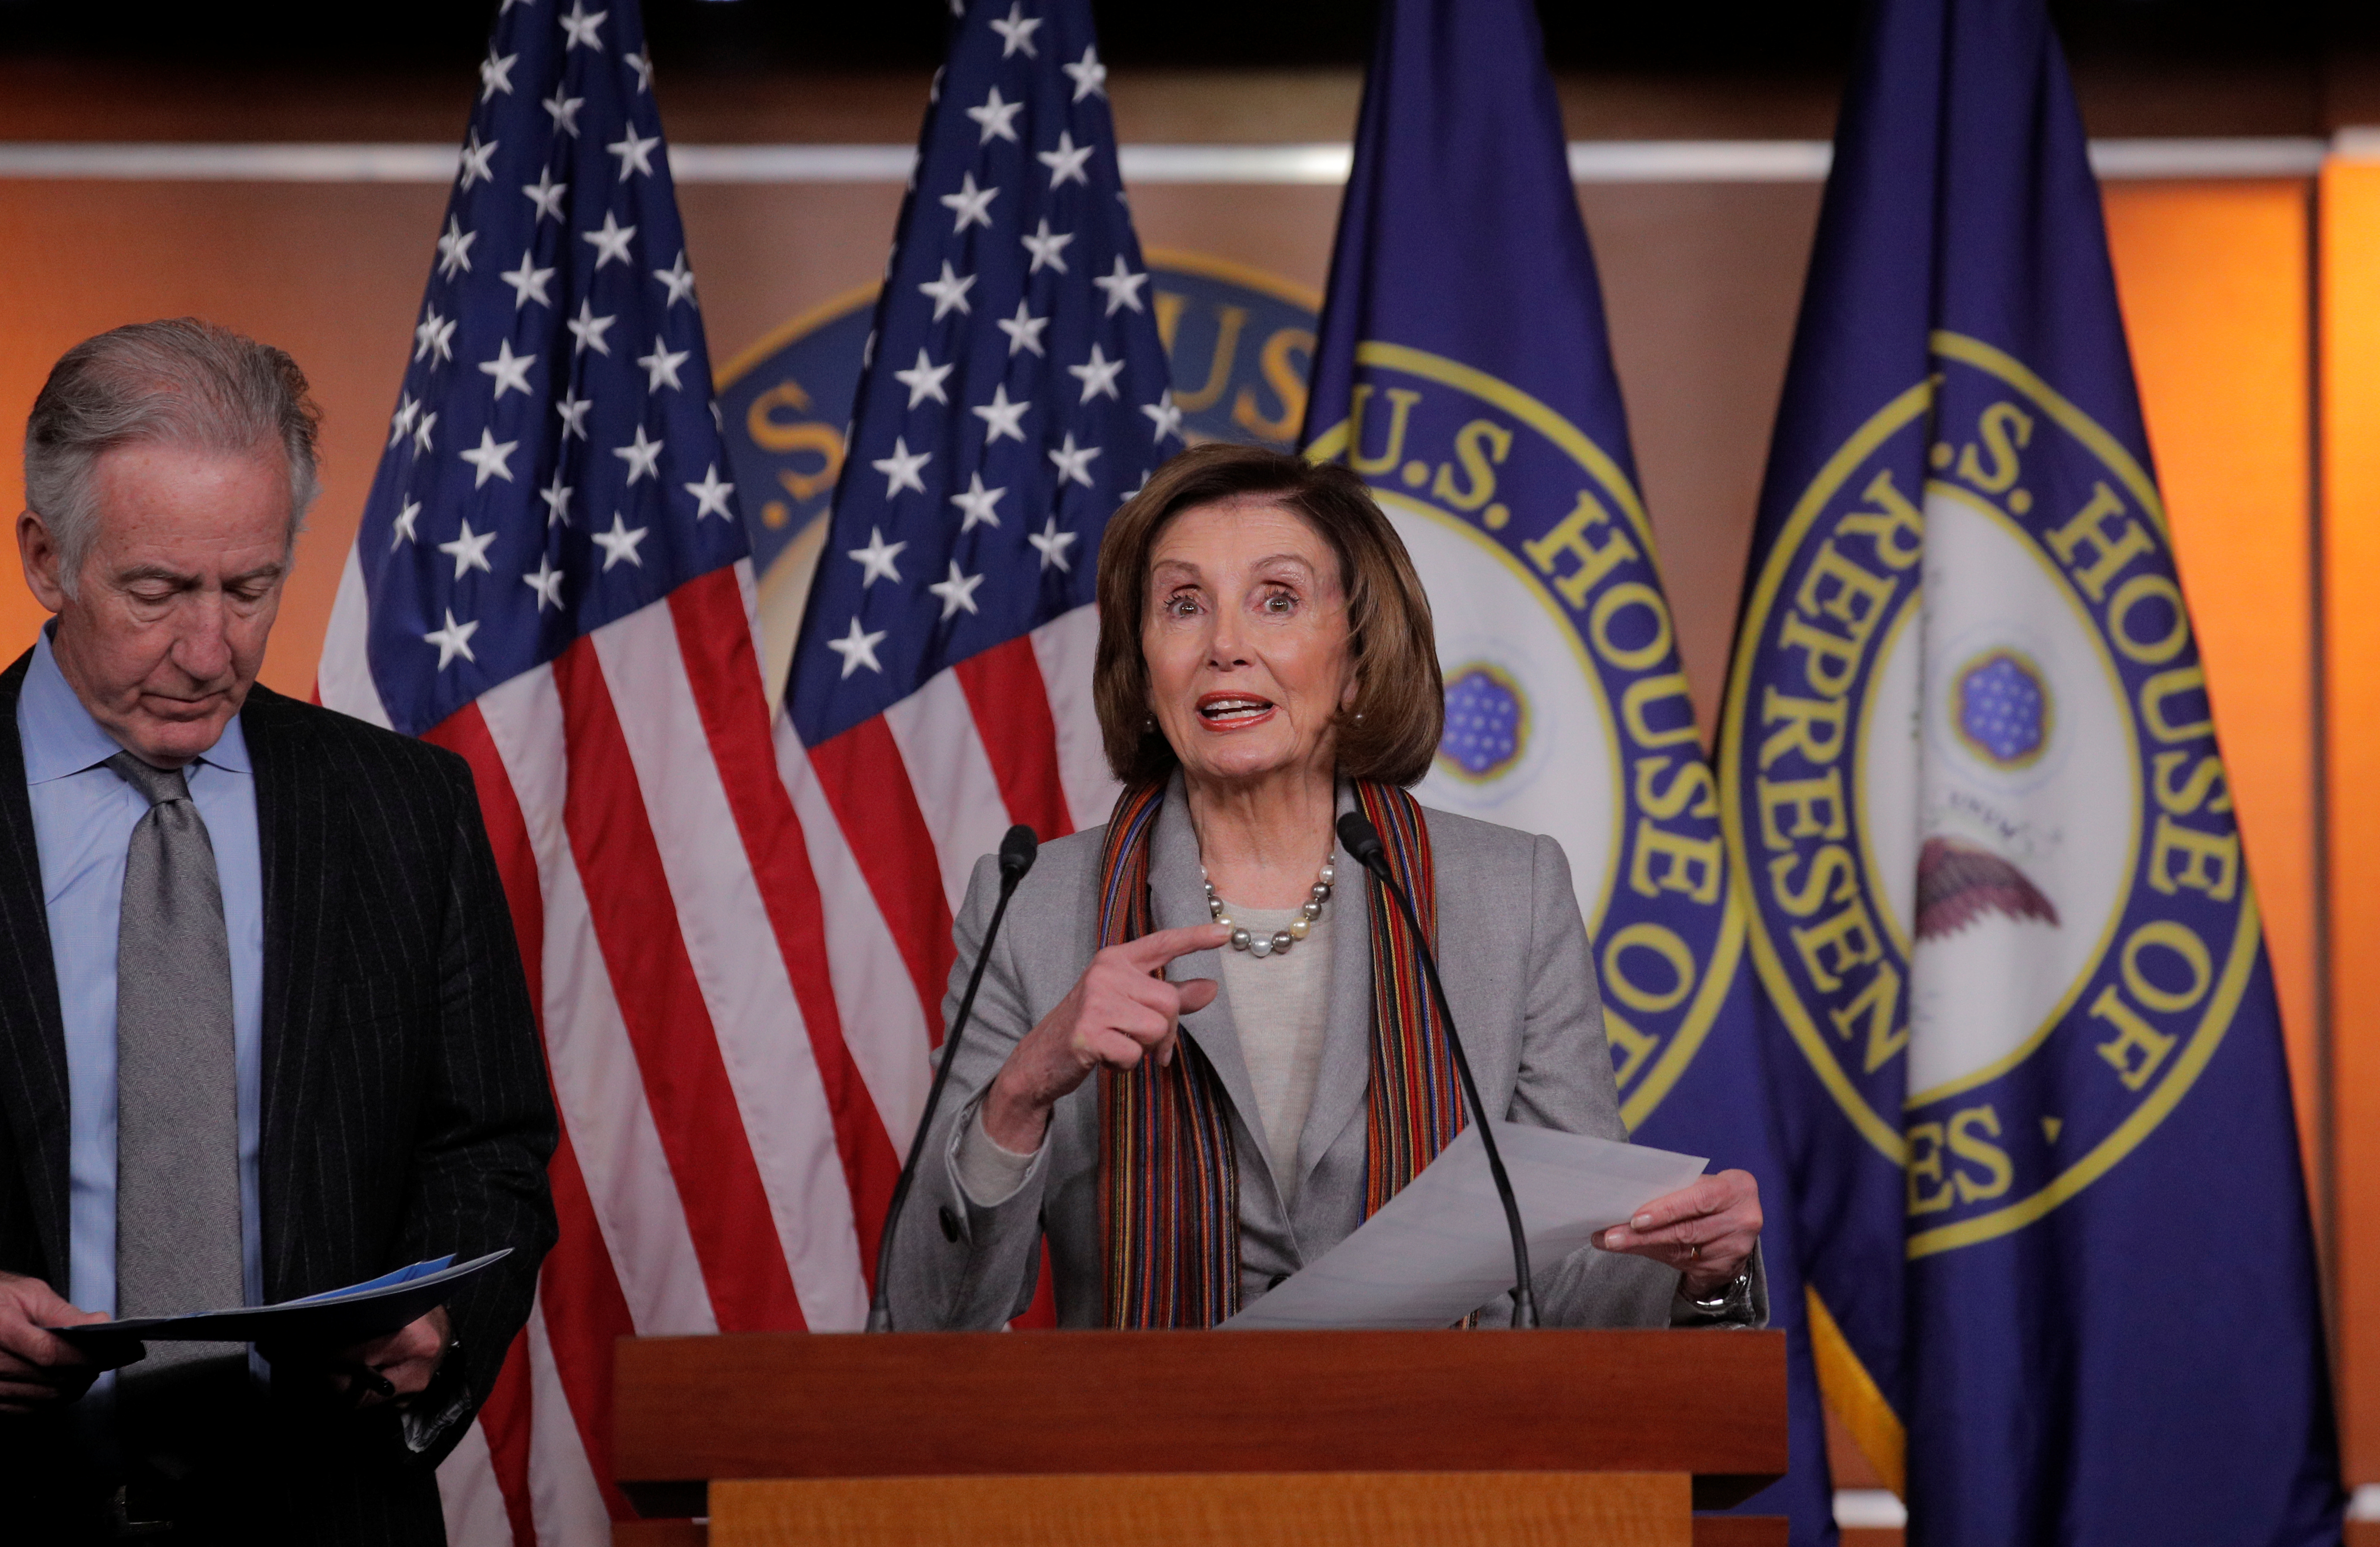 U.S. Speaker of the House Nancy Pelosi holds a news conference with House Ways and Means Committee Chairman Richard Neal to unveil a $760 billion infrastructure spending bill proposed by House Democrats at the U.S. Capitol in Washington, U.S., Jan. 29, 2020. REUTERS/Brendan McDermid 